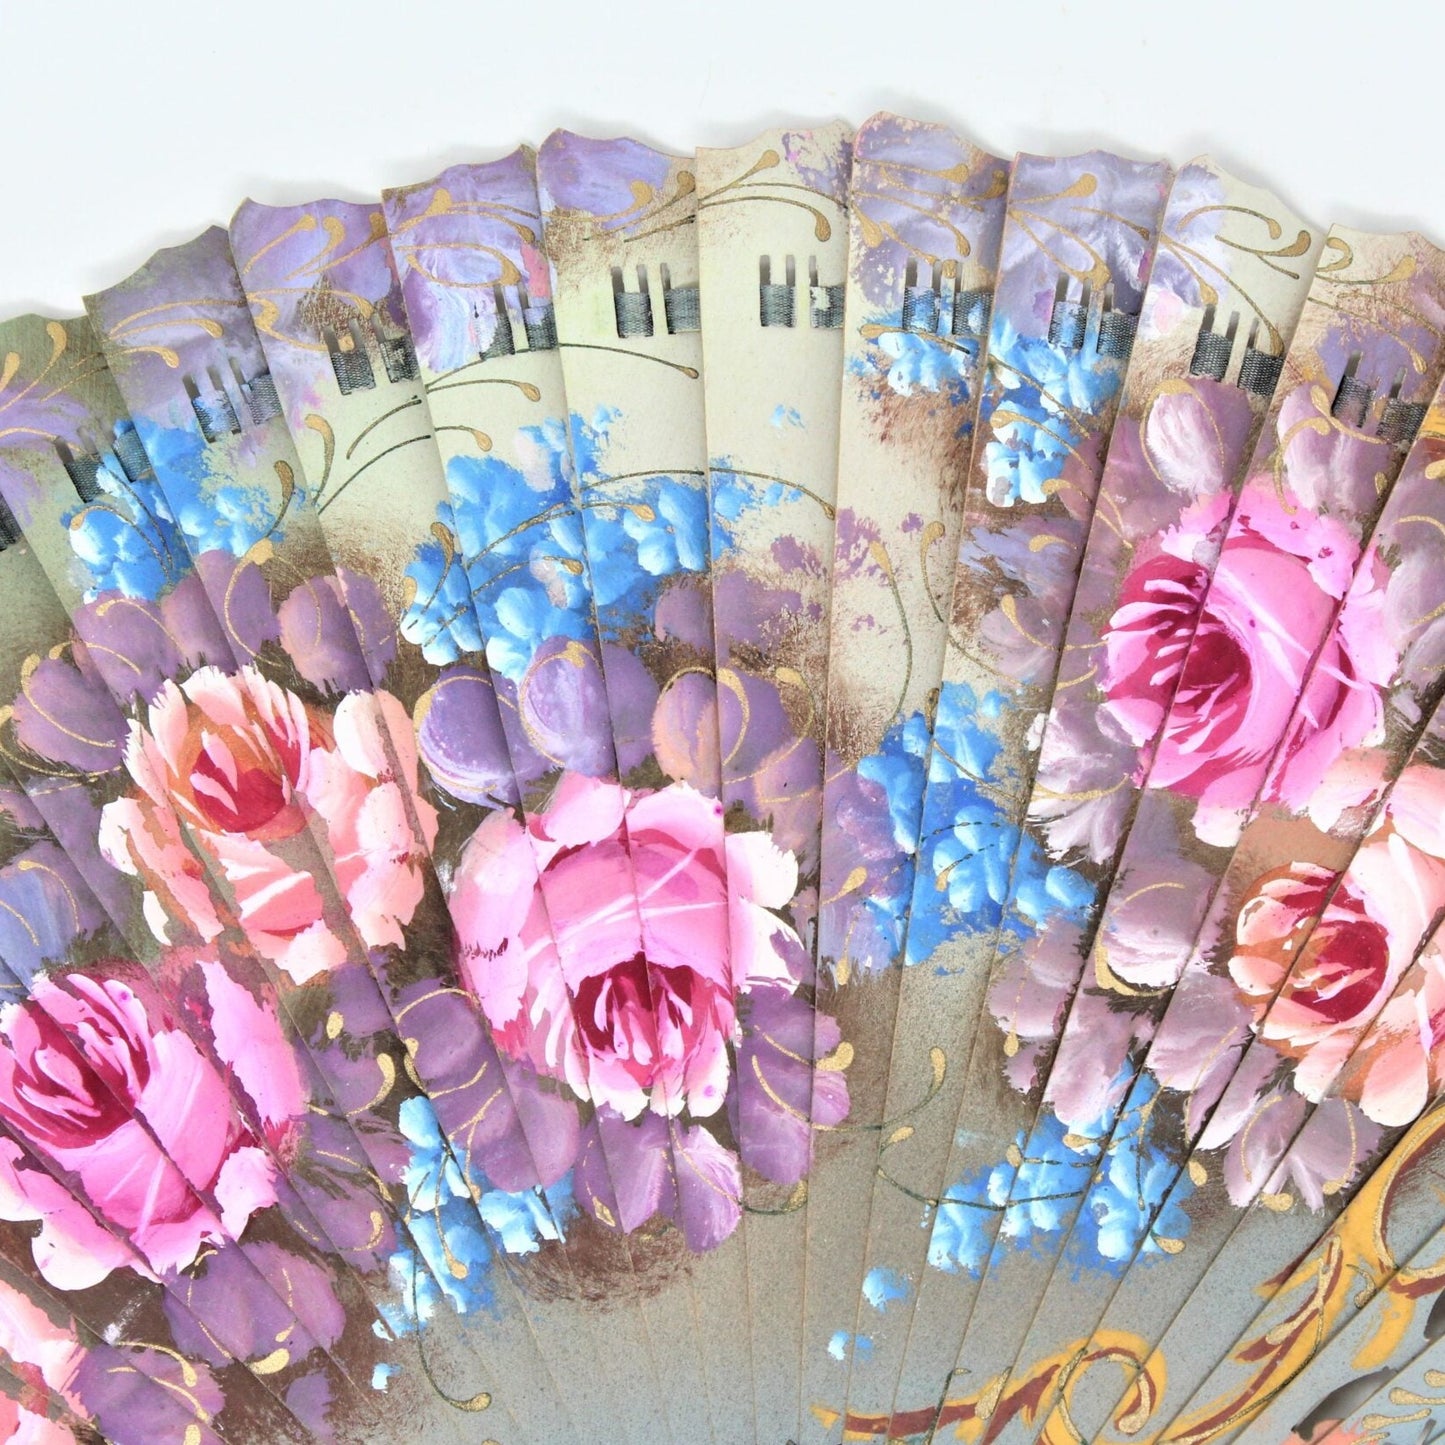 Hand Fan, Spanish Style, Hand Painted, Wood Open Cut-Work, Roses, Vintage